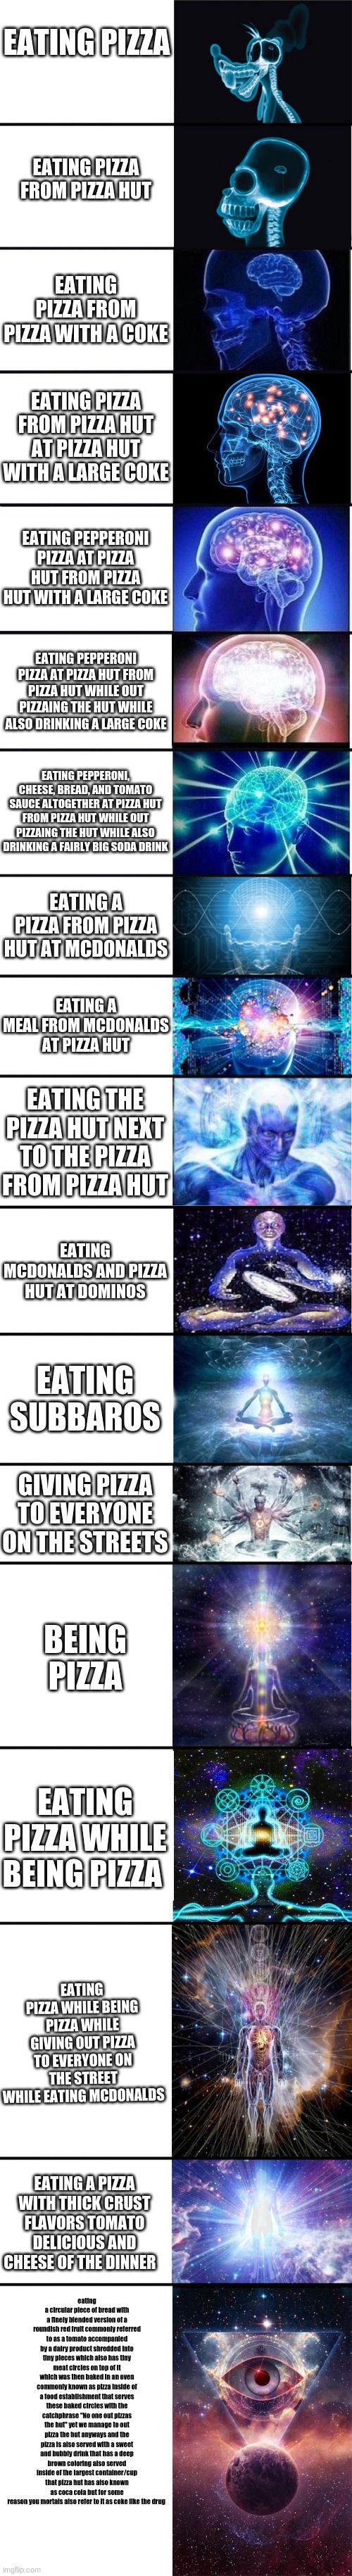 im funny laugh pls | EATING PIZZA; EATING PIZZA FROM PIZZA HUT; EATING PIZZA FROM PIZZA WITH A COKE; EATING PIZZA FROM PIZZA HUT AT PIZZA HUT WITH A LARGE COKE; EATING PEPPERONI PIZZA AT PIZZA HUT FROM PIZZA HUT WITH A LARGE COKE; EATING PEPPERONI PIZZA AT PIZZA HUT FROM PIZZA HUT WHILE OUT PIZZAING THE HUT WHILE ALSO DRINKING A LARGE COKE; EATING PEPPERONI, CHEESE, BREAD, AND TOMATO SAUCE ALTOGETHER AT PIZZA HUT FROM PIZZA HUT WHILE OUT PIZZAING THE HUT WHILE ALSO DRINKING A FAIRLY BIG SODA DRINK; EATING A PIZZA FROM PIZZA HUT AT MCDONALDS; EATING A MEAL FROM MCDONALDS AT PIZZA HUT; EATING THE PIZZA HUT NEXT TO THE PIZZA FROM PIZZA HUT; EATING MCDONALDS AND PIZZA HUT AT DOMINOS; EATING SUBBAROS; GIVING PIZZA TO EVERYONE ON THE STREETS; BEING PIZZA; EATING PIZZA WHILE BEING PIZZA; EATING PIZZA WHILE BEING PIZZA WHILE GIVING OUT PIZZA TO EVERYONE ON THE STREET WHILE EATING MCDONALDS; EATING A PIZZA WITH THICK CRUST FLAVORS TOMATO DELICIOUS AND CHEESE OF THE DINNER; eating a circular piece of bread with a finely blended version of a roundish red fruit commonly referred to as a tomato accompanied by a dairy product shredded into tiny pieces which also has tiny meat circles on top of it which was then baked in an oven commonly known as pizza inside of a food establishment that serves these baked circles with the catchphrase "No one out pizzas the hut" yet we manage to out pizza the hut anyways and the pizza is also served with a sweet and bubbly drink that has a deep brown coloring also served inside of the largest container/cup that pizza hut has also known as coca cola but for some reason you mortals also refer to it as coke like the drug | image tagged in expanding brain 9001 | made w/ Imgflip meme maker